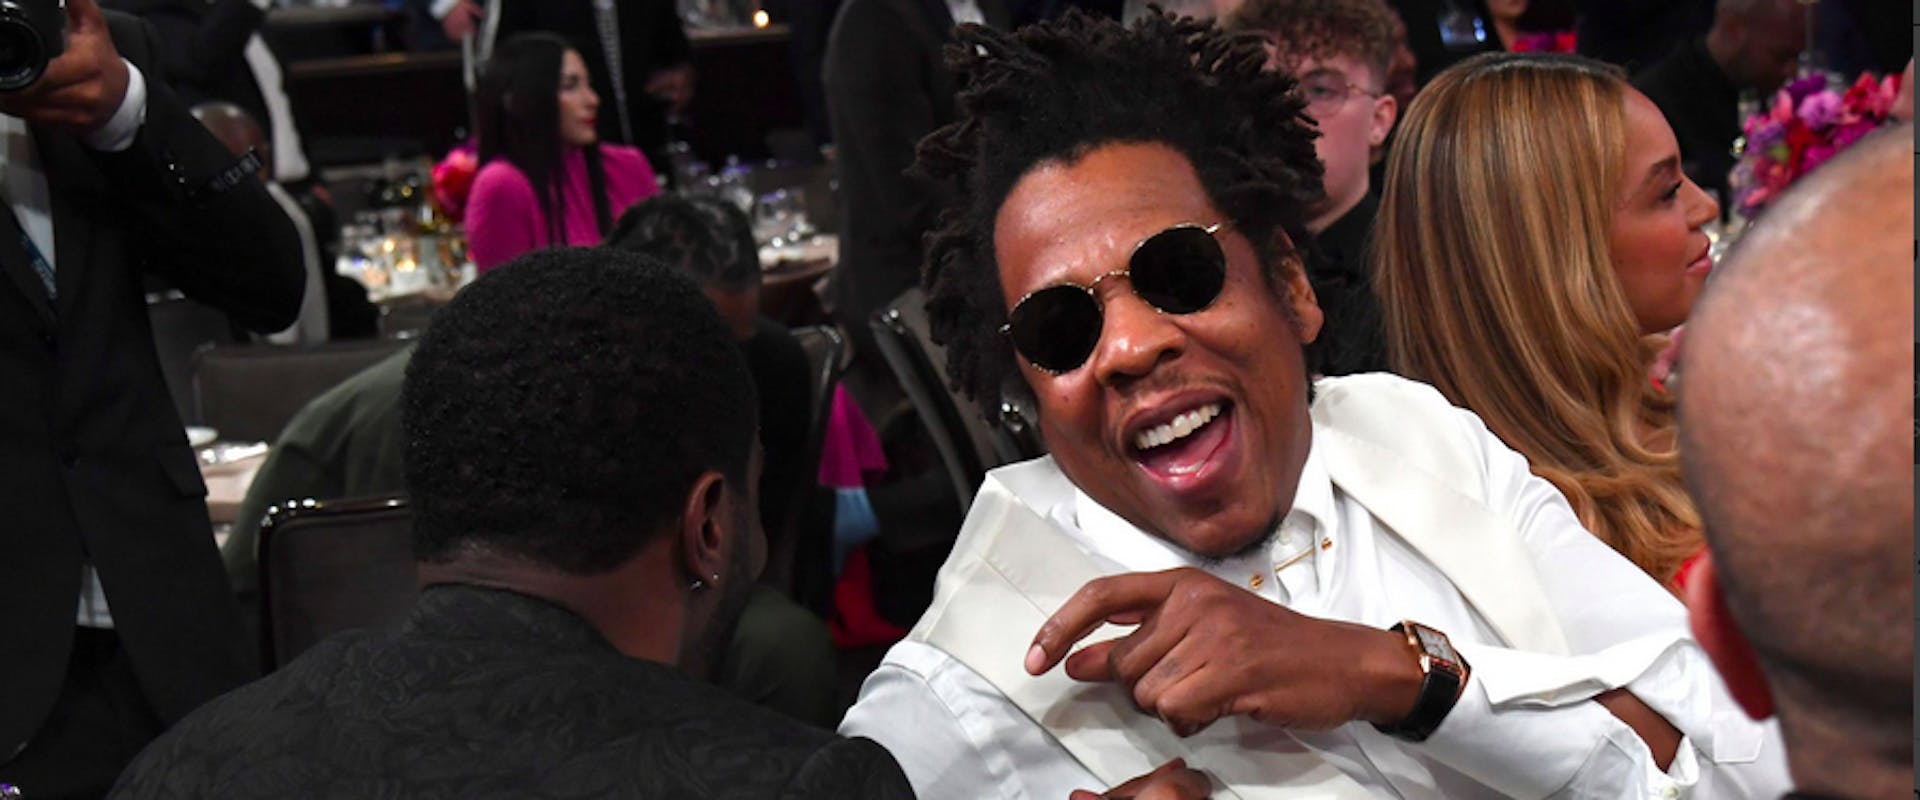 Jay-Z Flexes in a Picture With Dozens of His Grammys